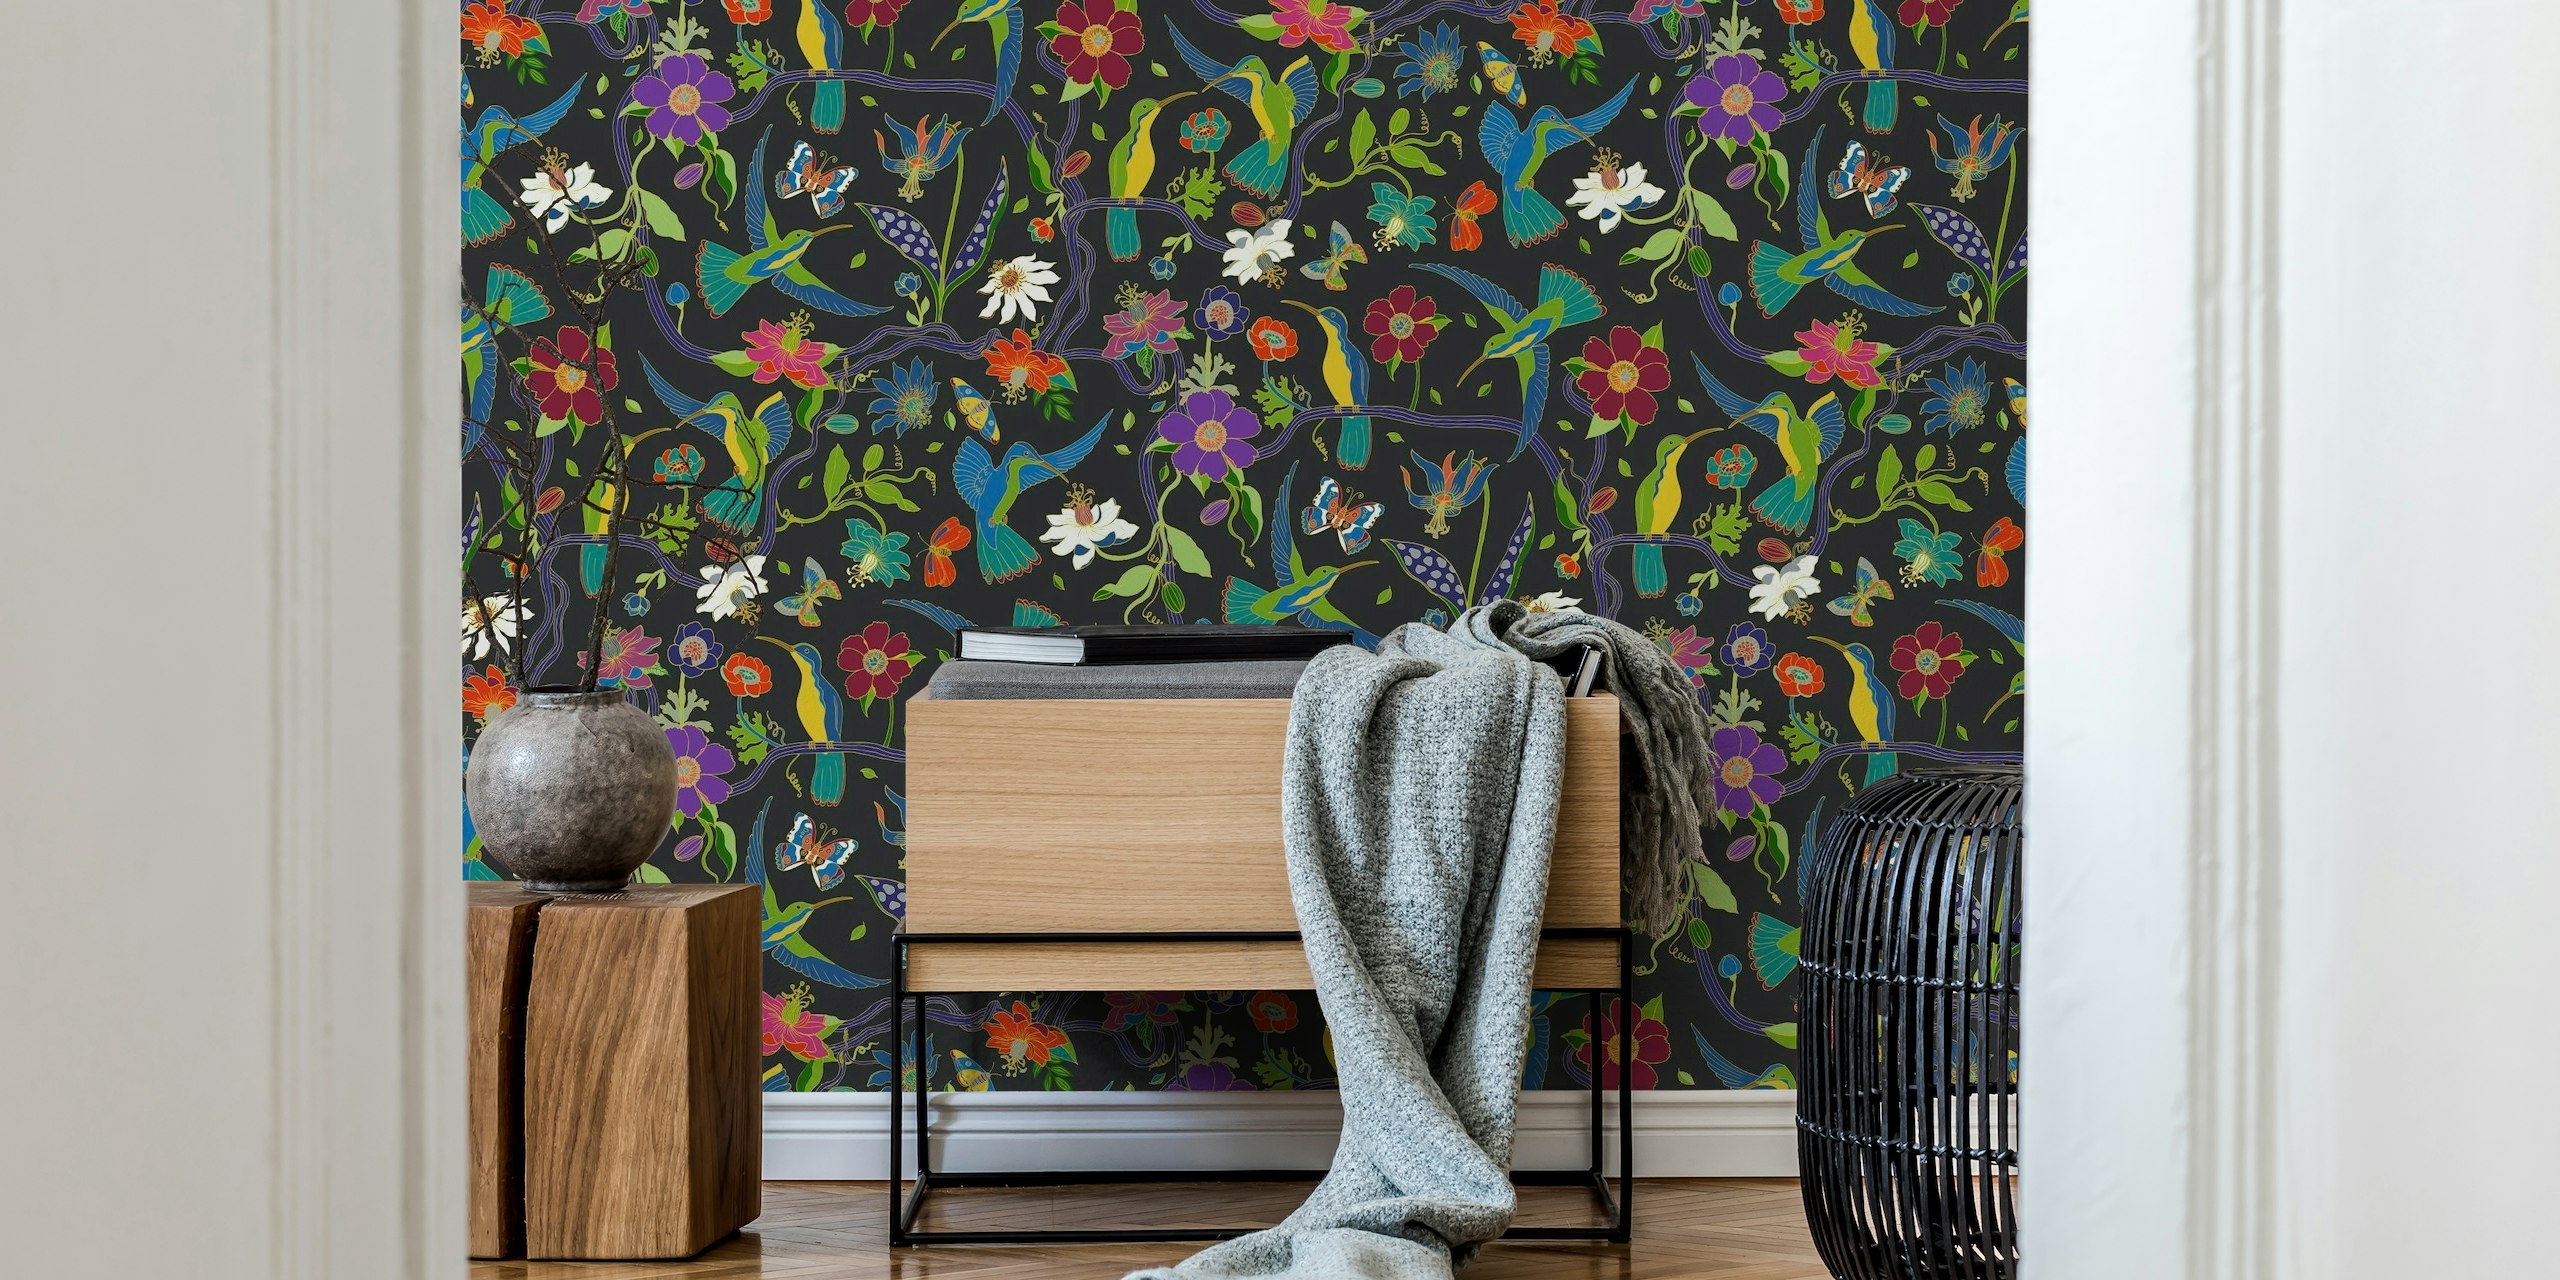 Hummingbirds and Passion flowers - cloisonne wallpaper